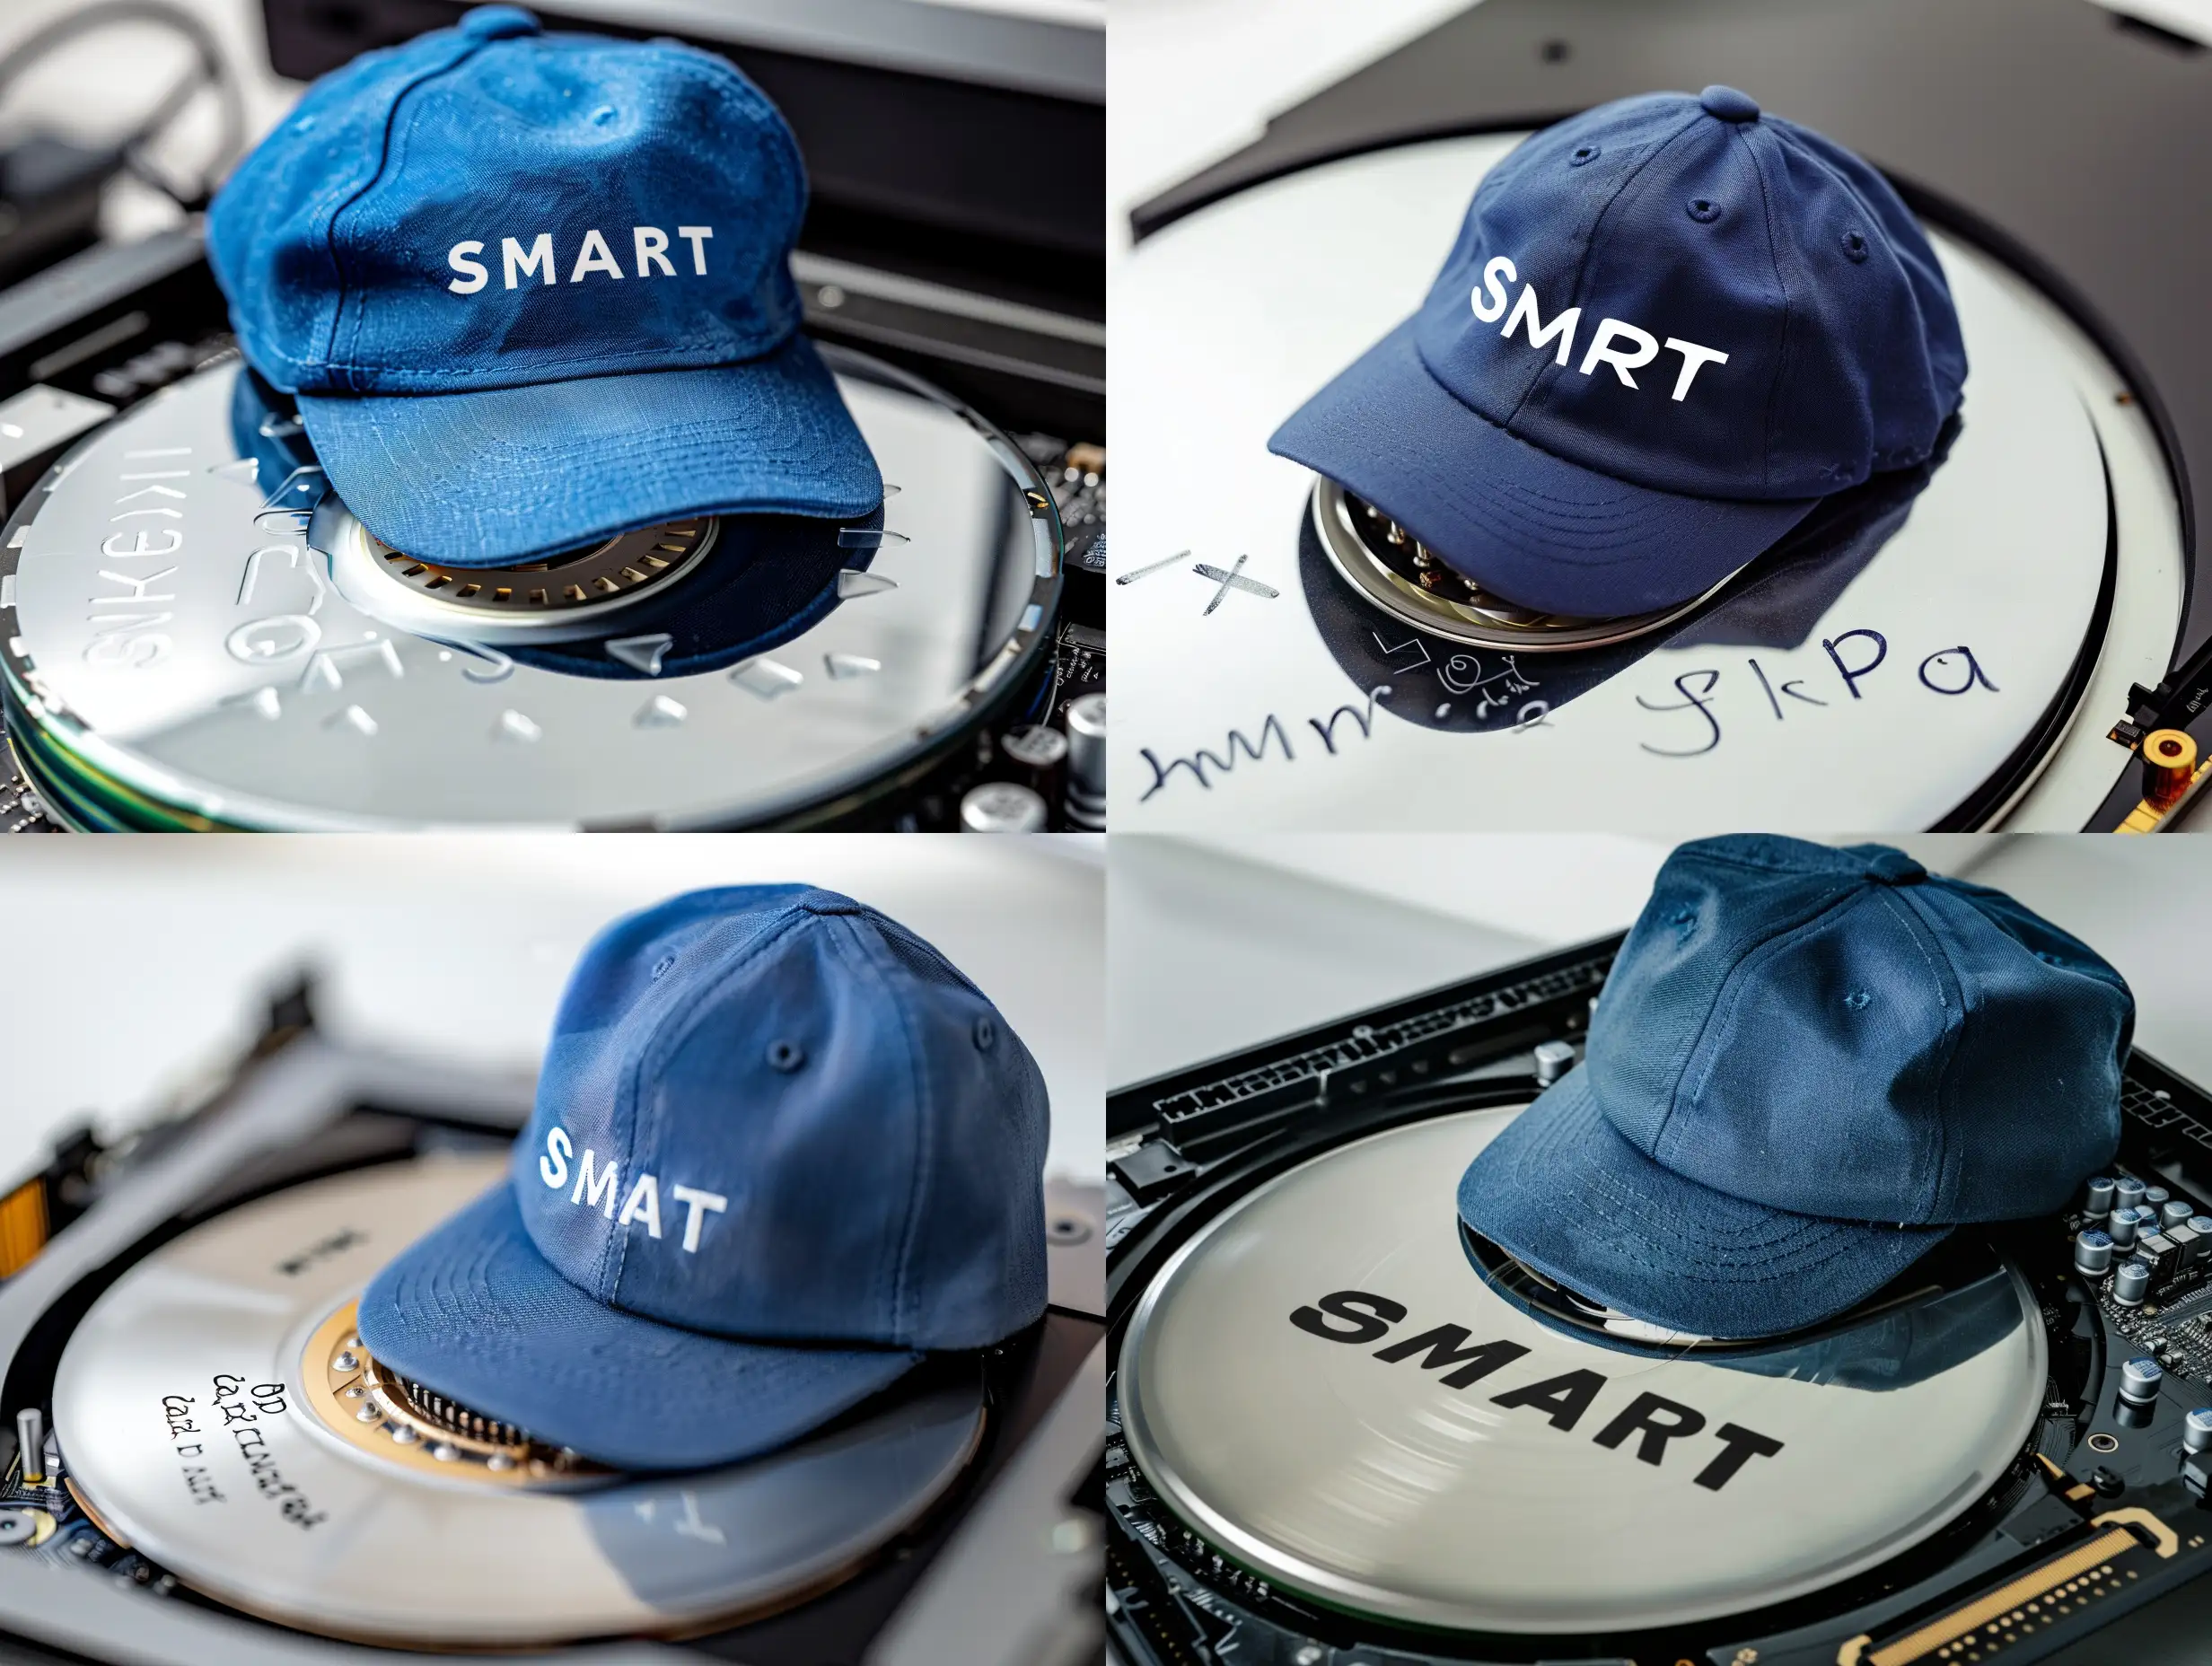 "SMART". Photo on a white background. Computer hard disk showing disk platter. Wearing a blue cap. Write "SMART" on the cap.